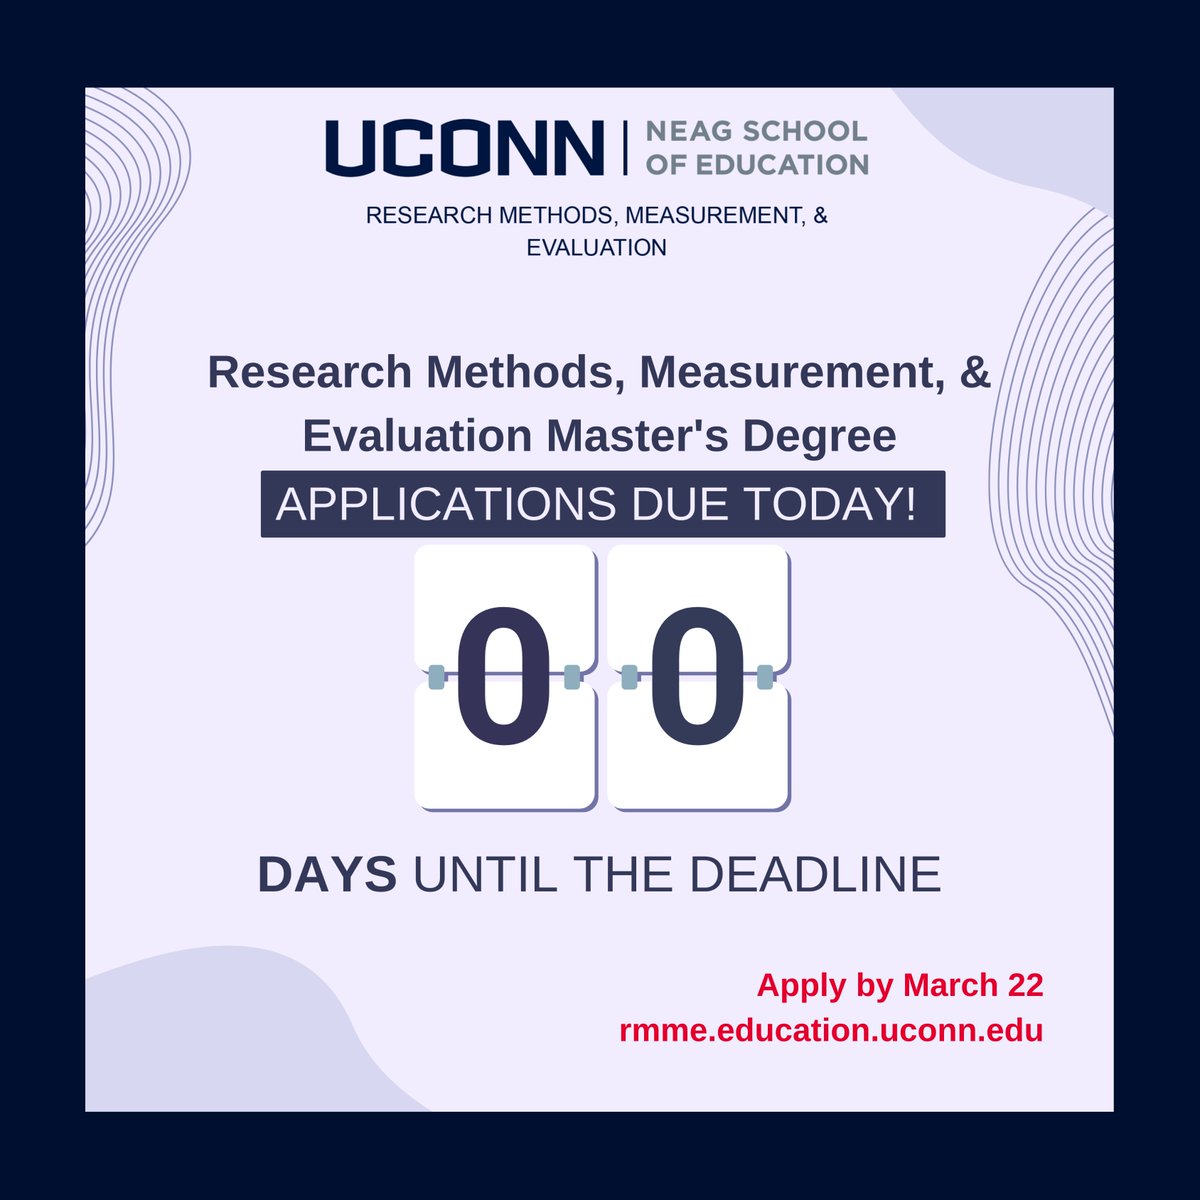 REMINDER! #Summer #Applications to #UConn’s 100% #Online #Research #Methods, #Measurement, & #Evaluation #MastersDegree program due TODAY, 3/22!

#Build #CuttingEdge, #Interdisciplinary #Skills in #QuantitativeResearch, #Data #Analysis, & #ProgramEvaluation!

#ApplyNow